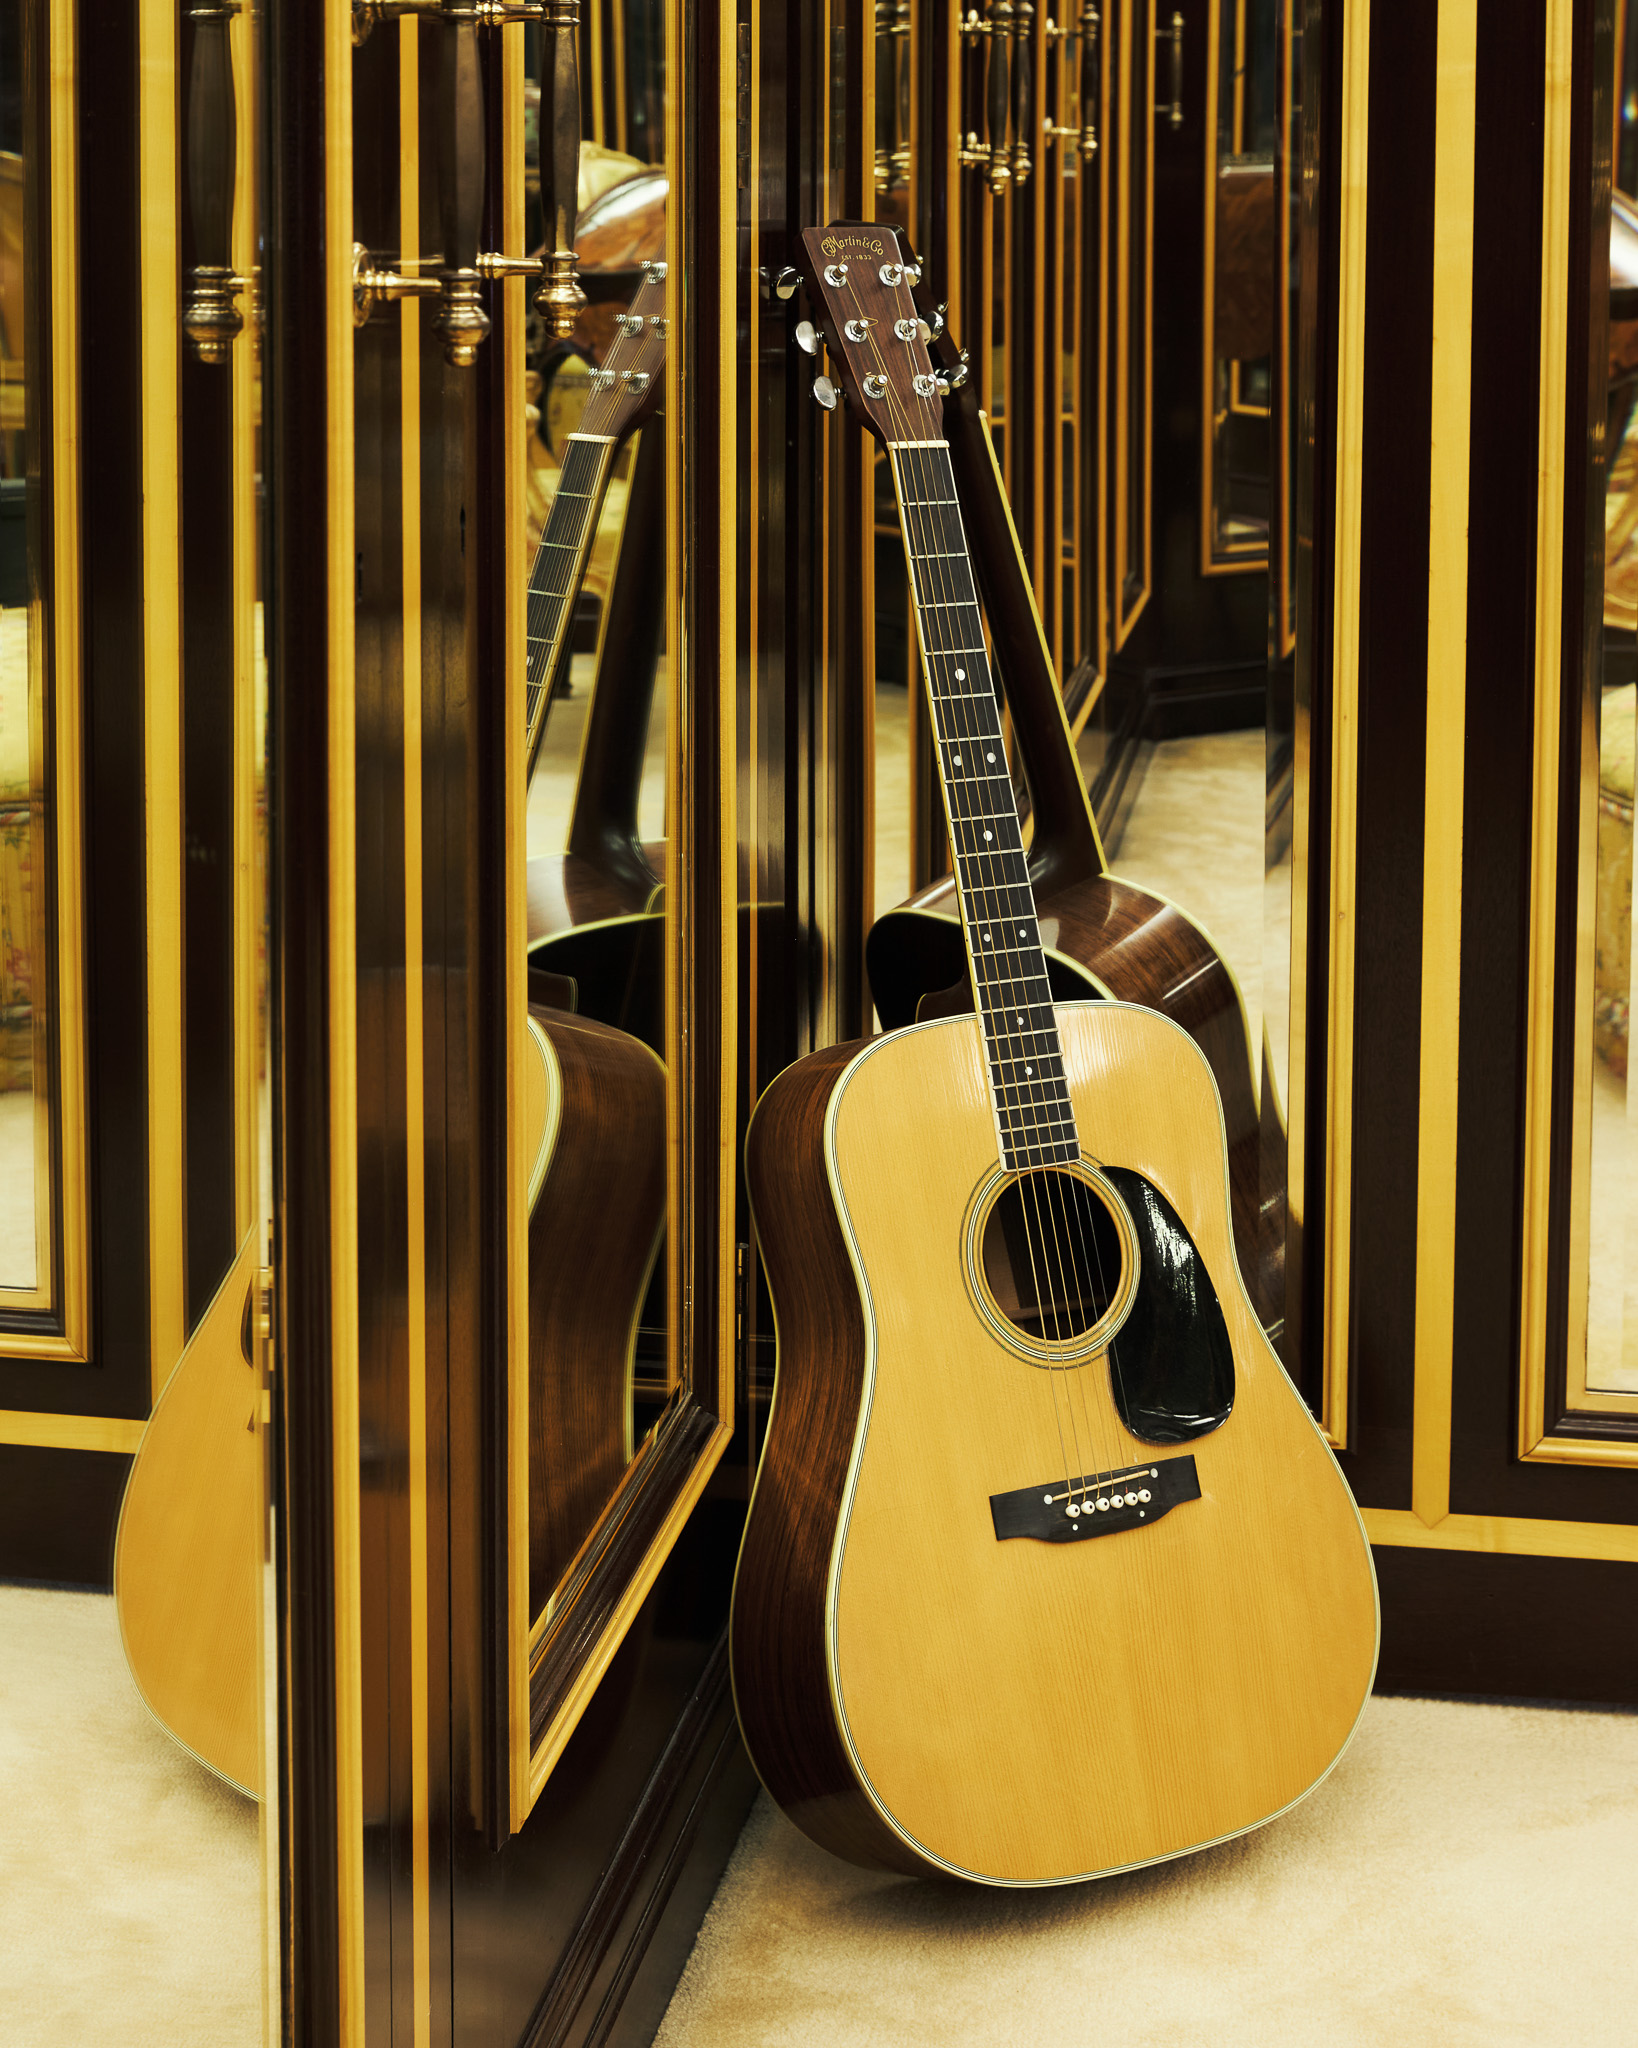 The Wick - Freddie Mercury’s Martin D35 Acoustic Guitar, courtesy of Sotheby's